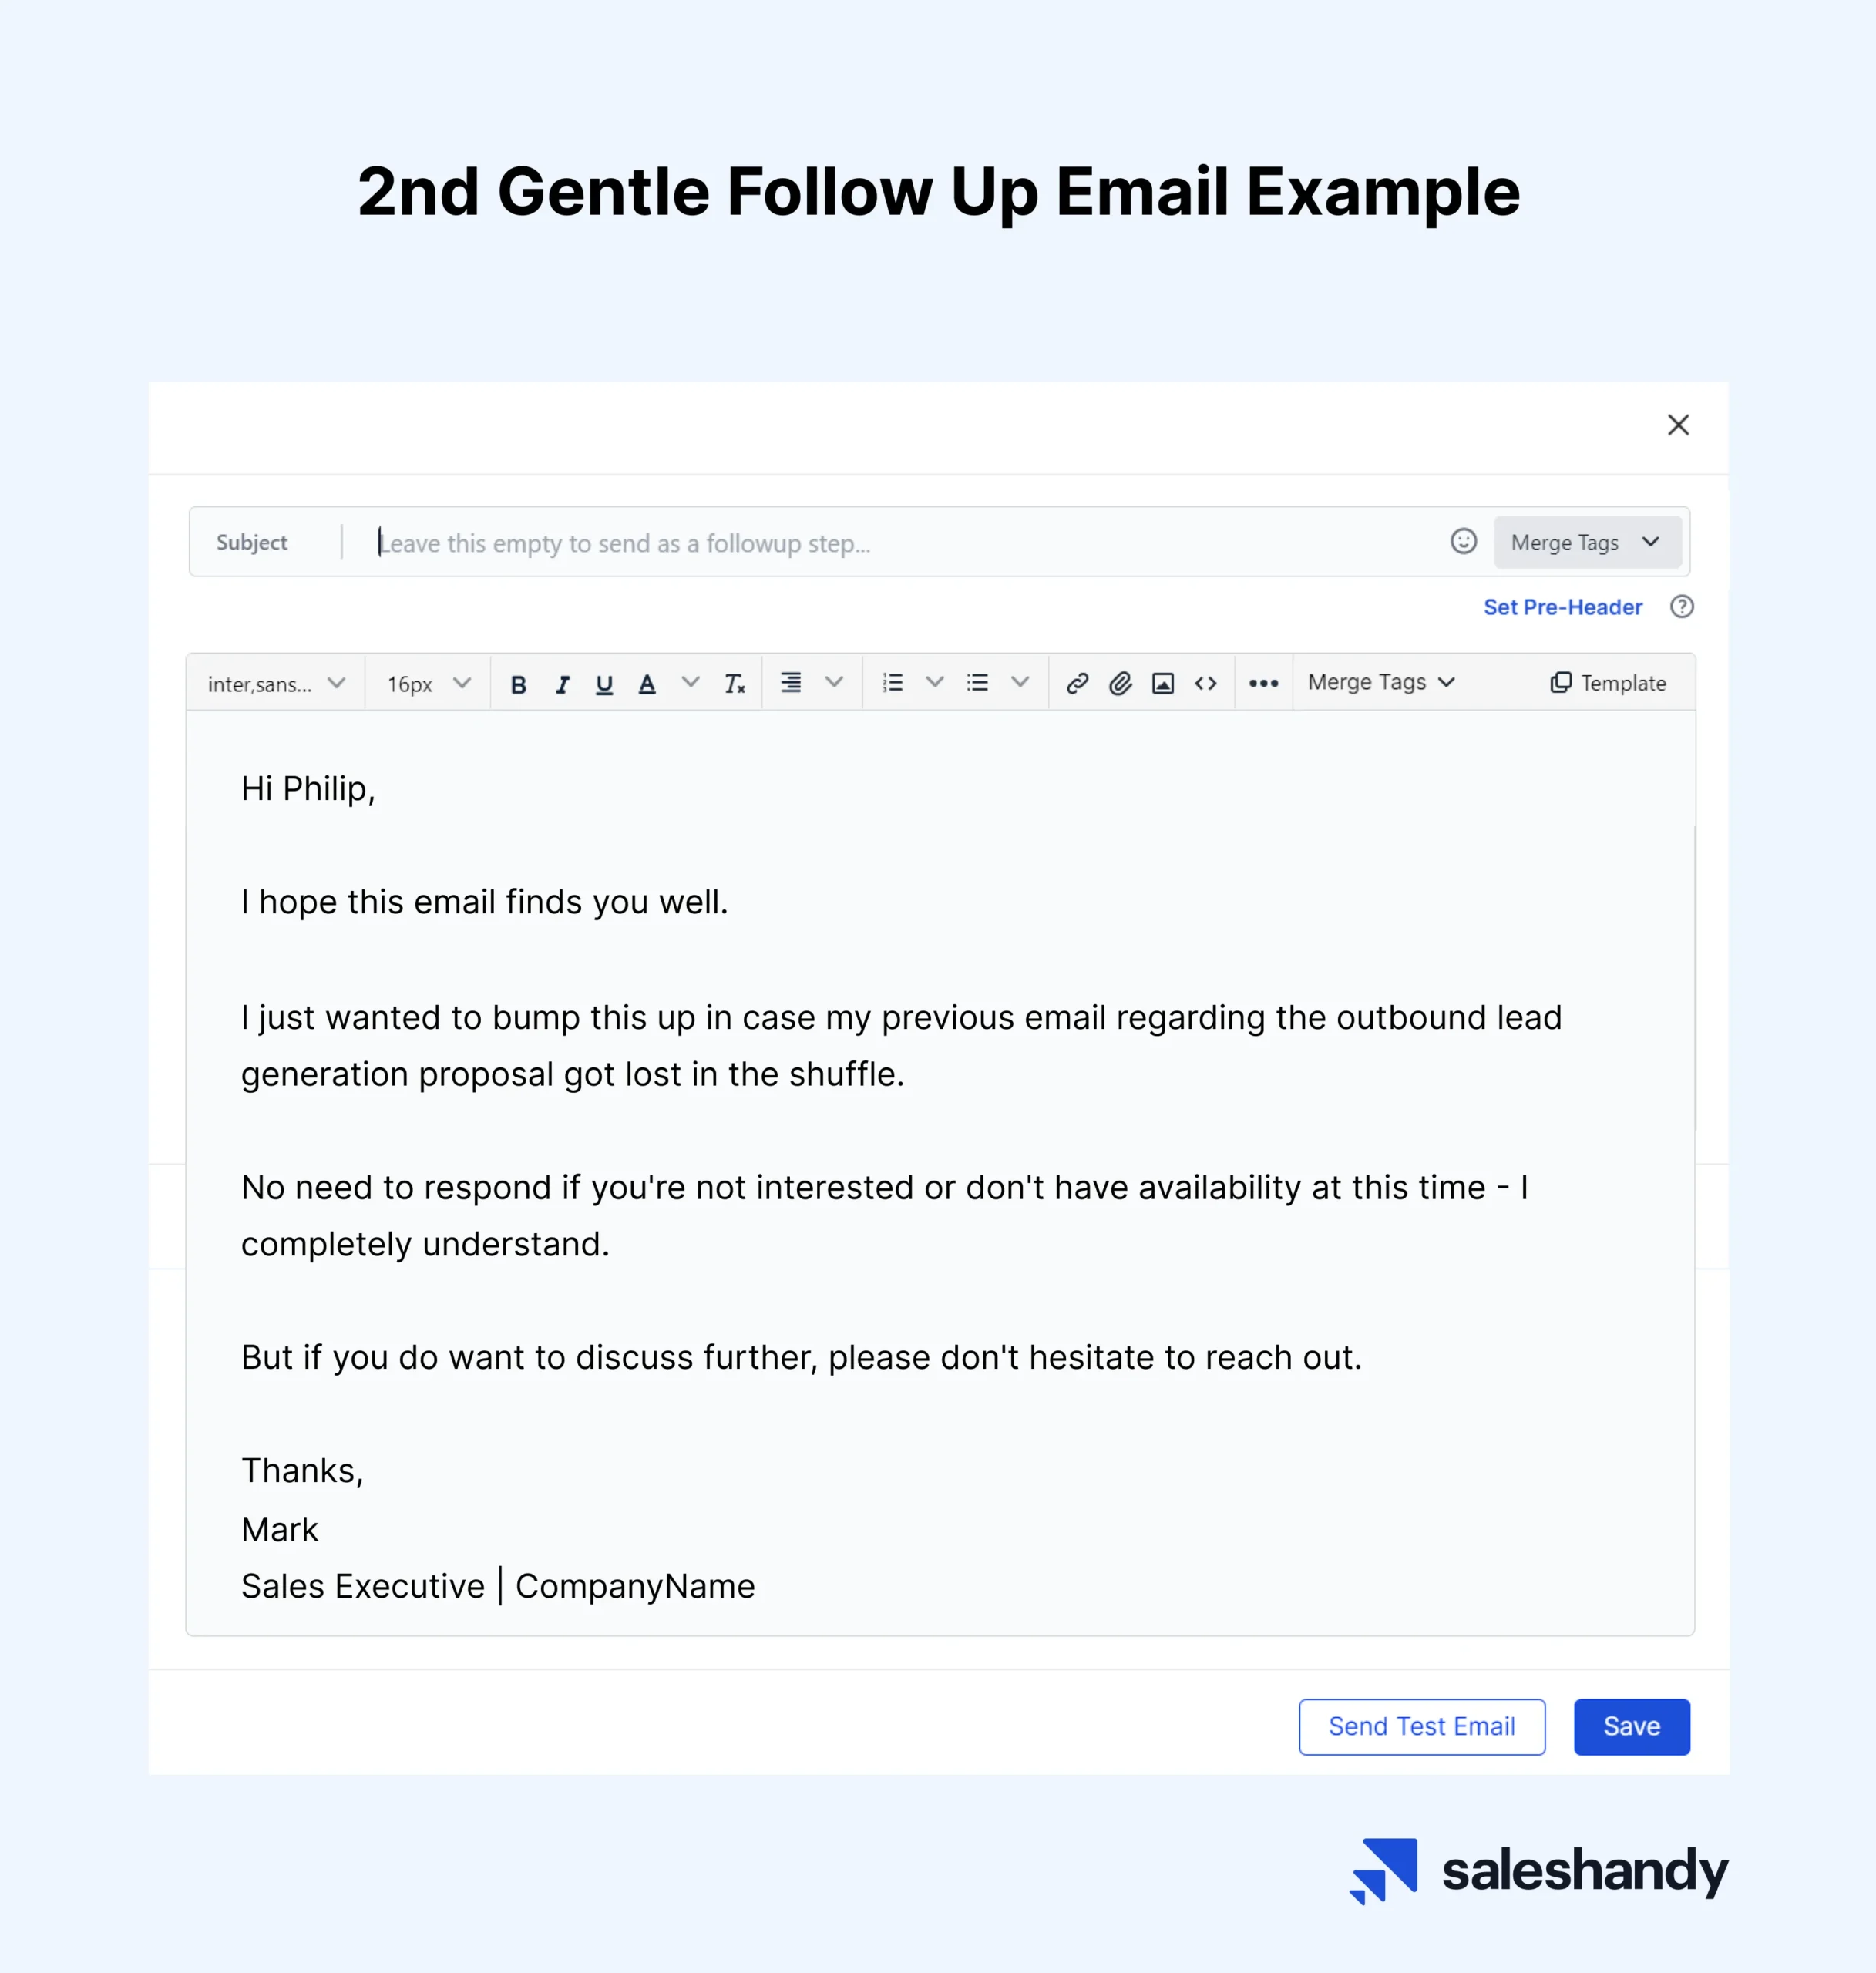 How to Start an Email: 8 Greetings & Opening Lines + Examples